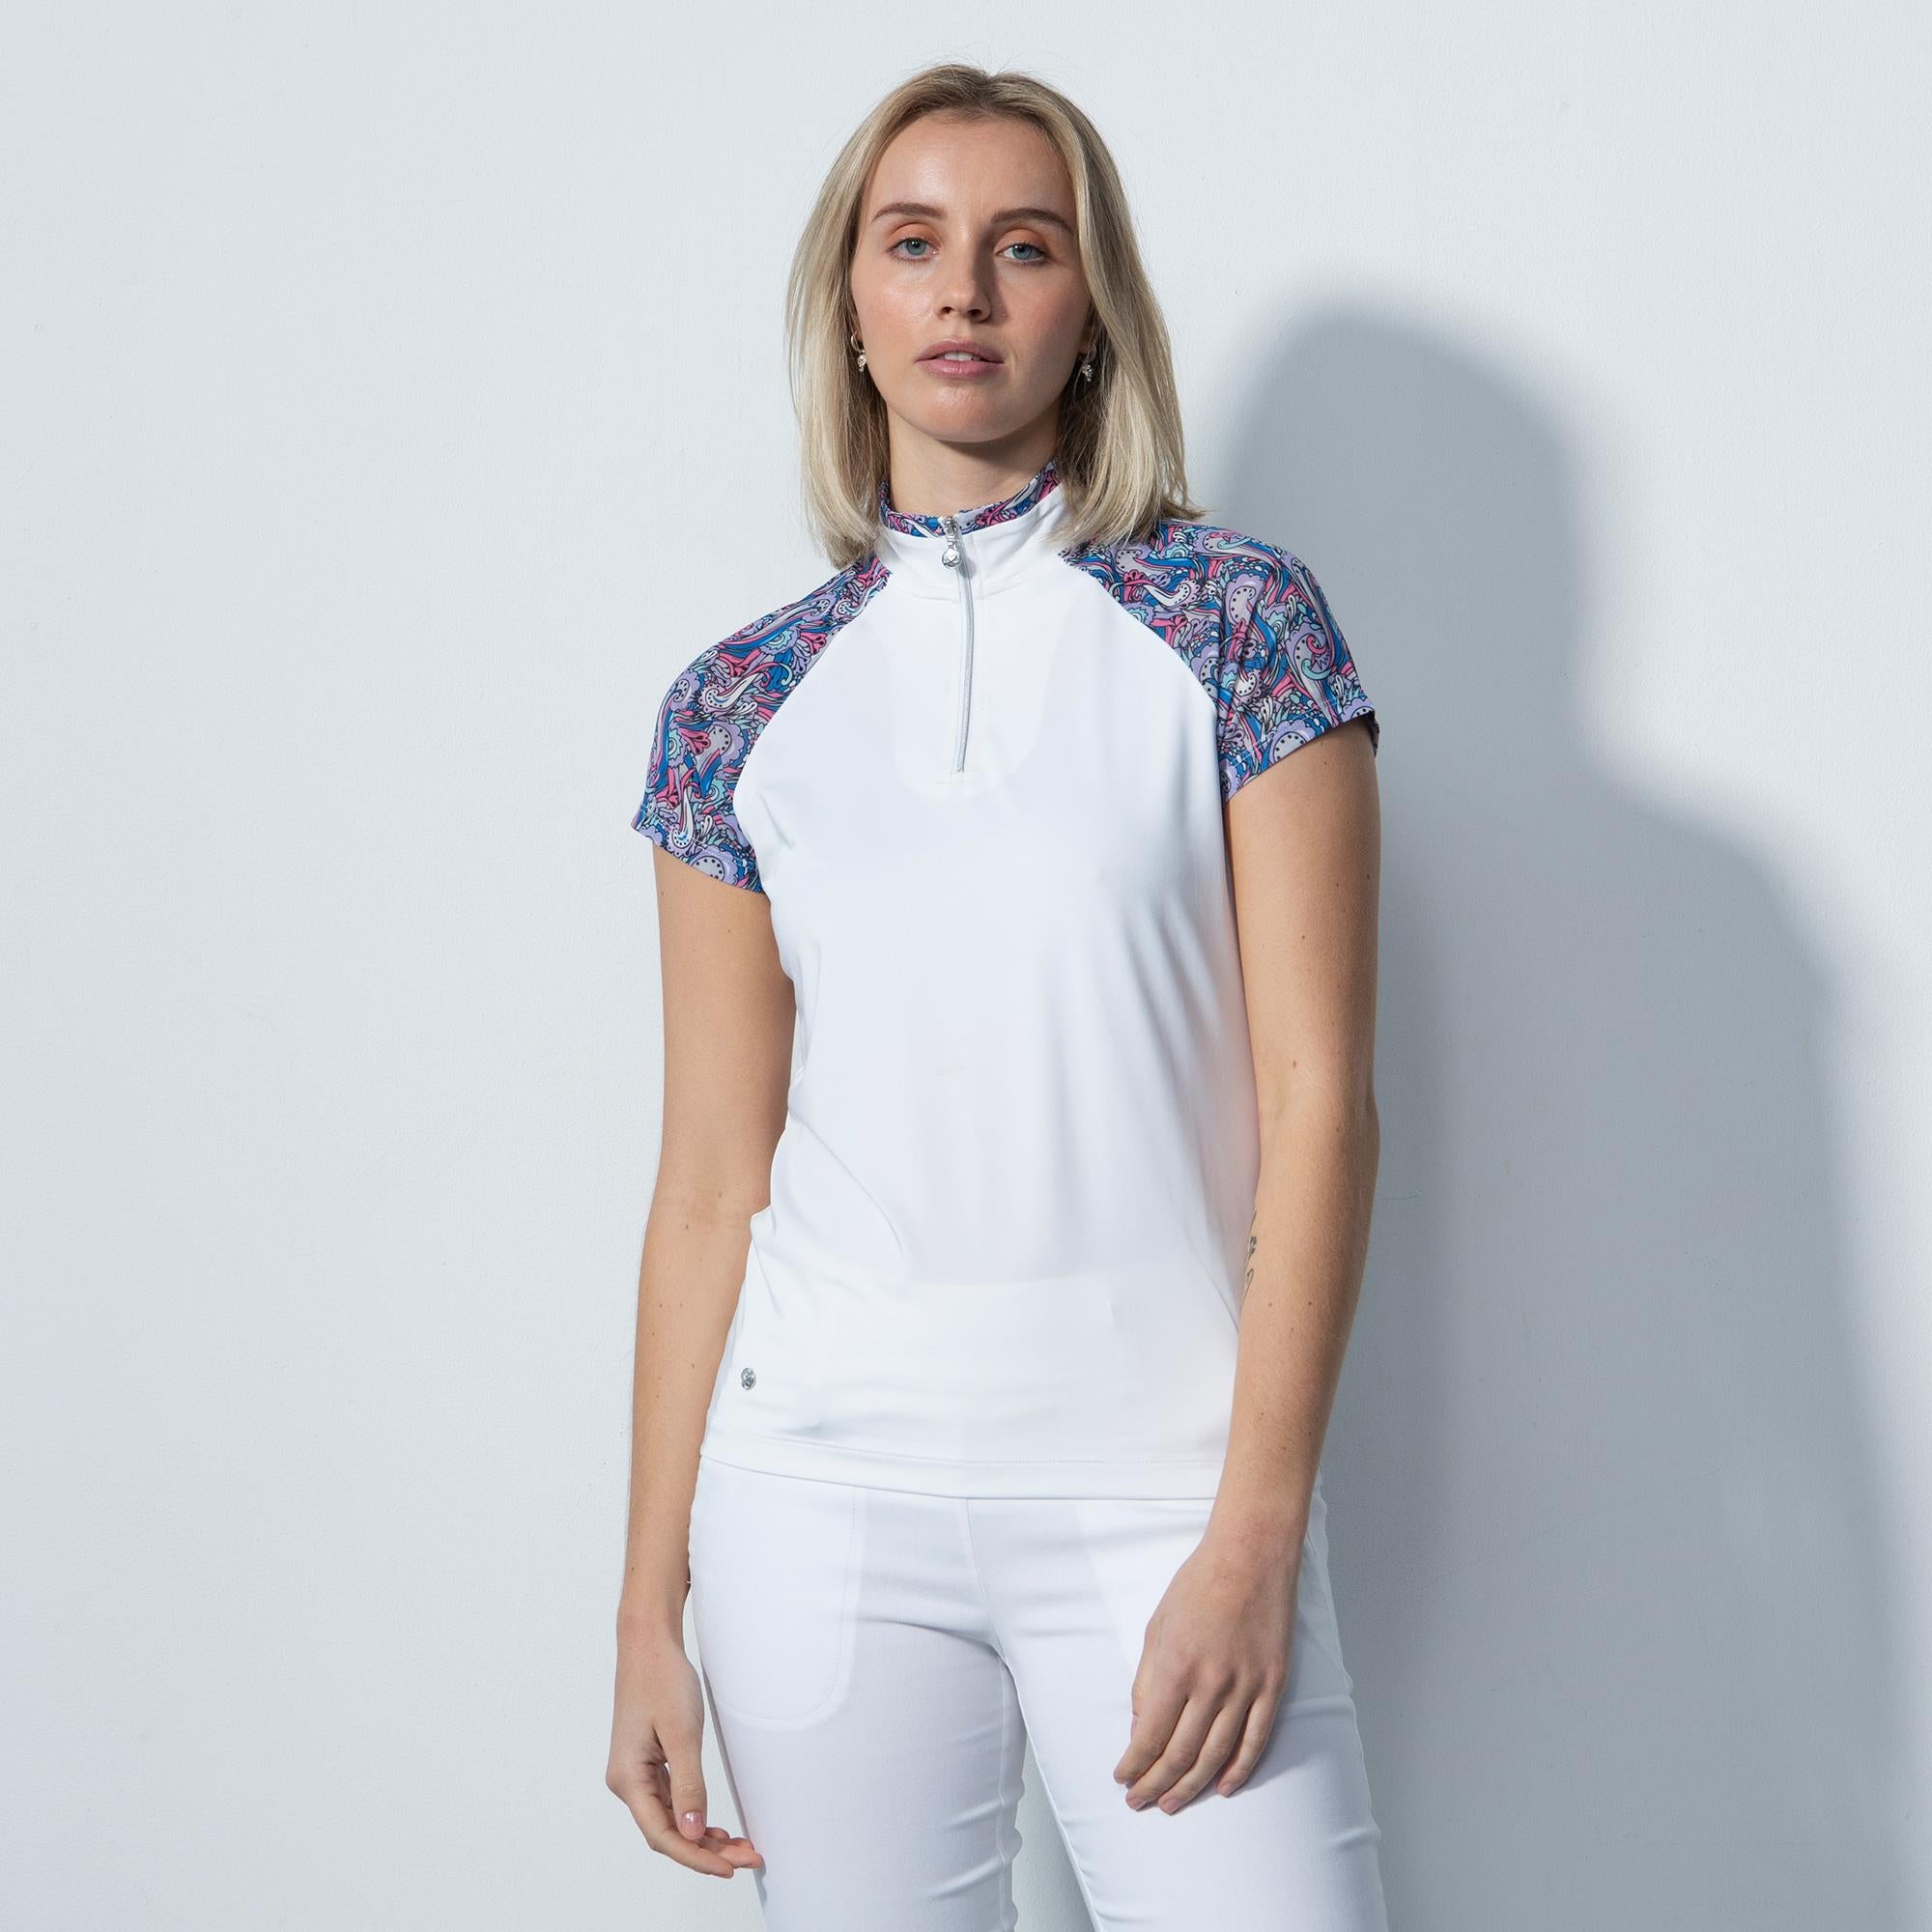 blonde model shot wearing white polo shirt with shoulder detail and white trousers